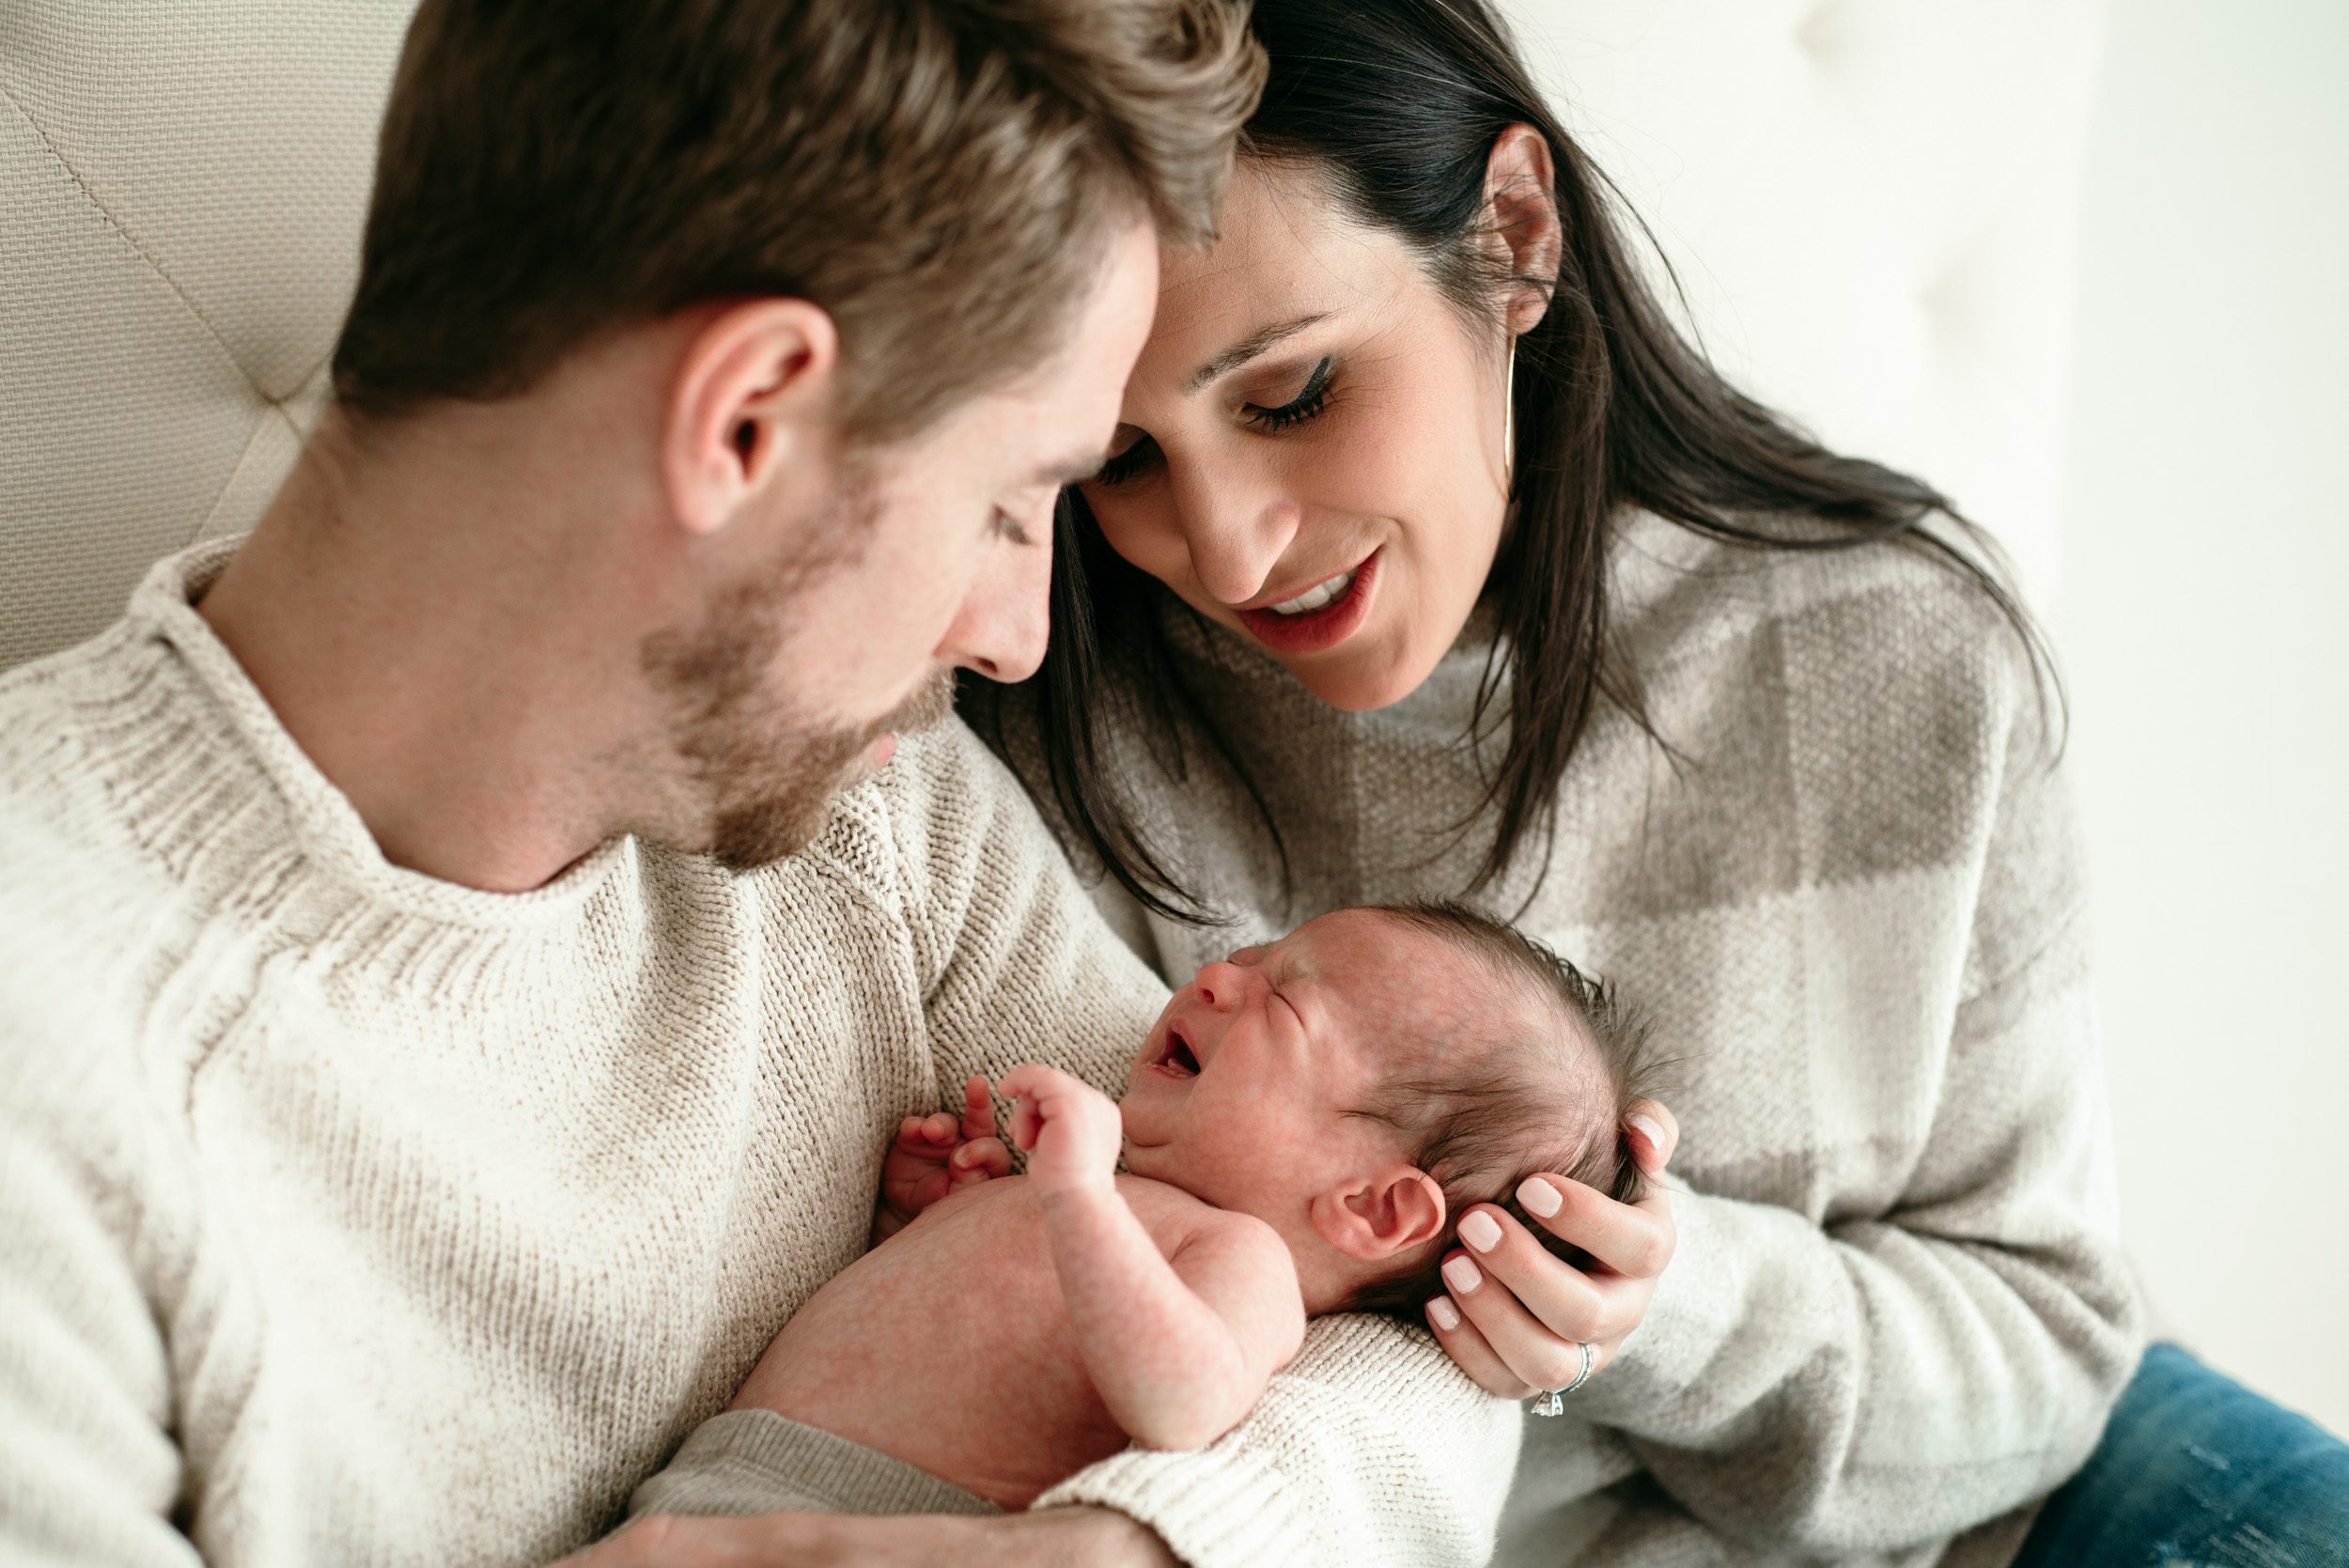 parents comforting their crying newborn son during a natural newborn photoshoot